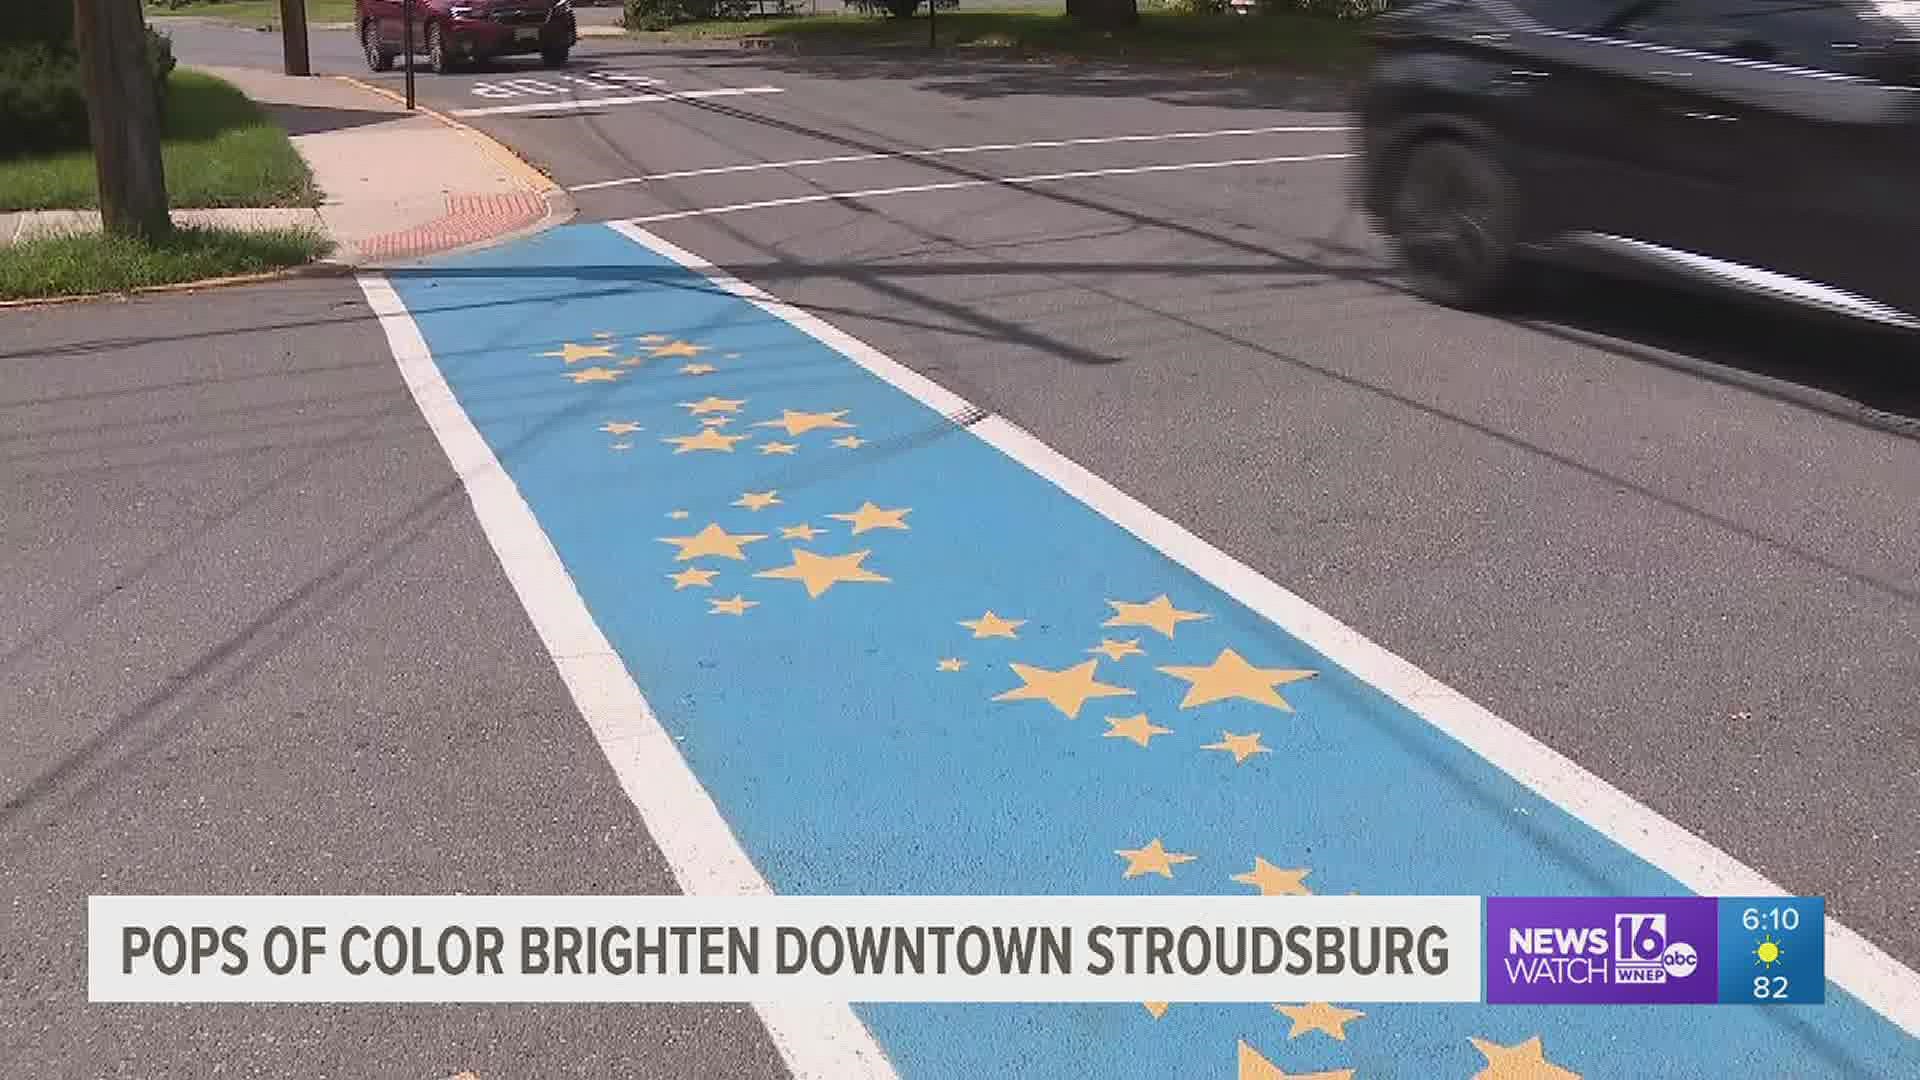 If you've taken a stroll around downtown Stroudsburg lately, you might notice pops of color at different crosswalks.